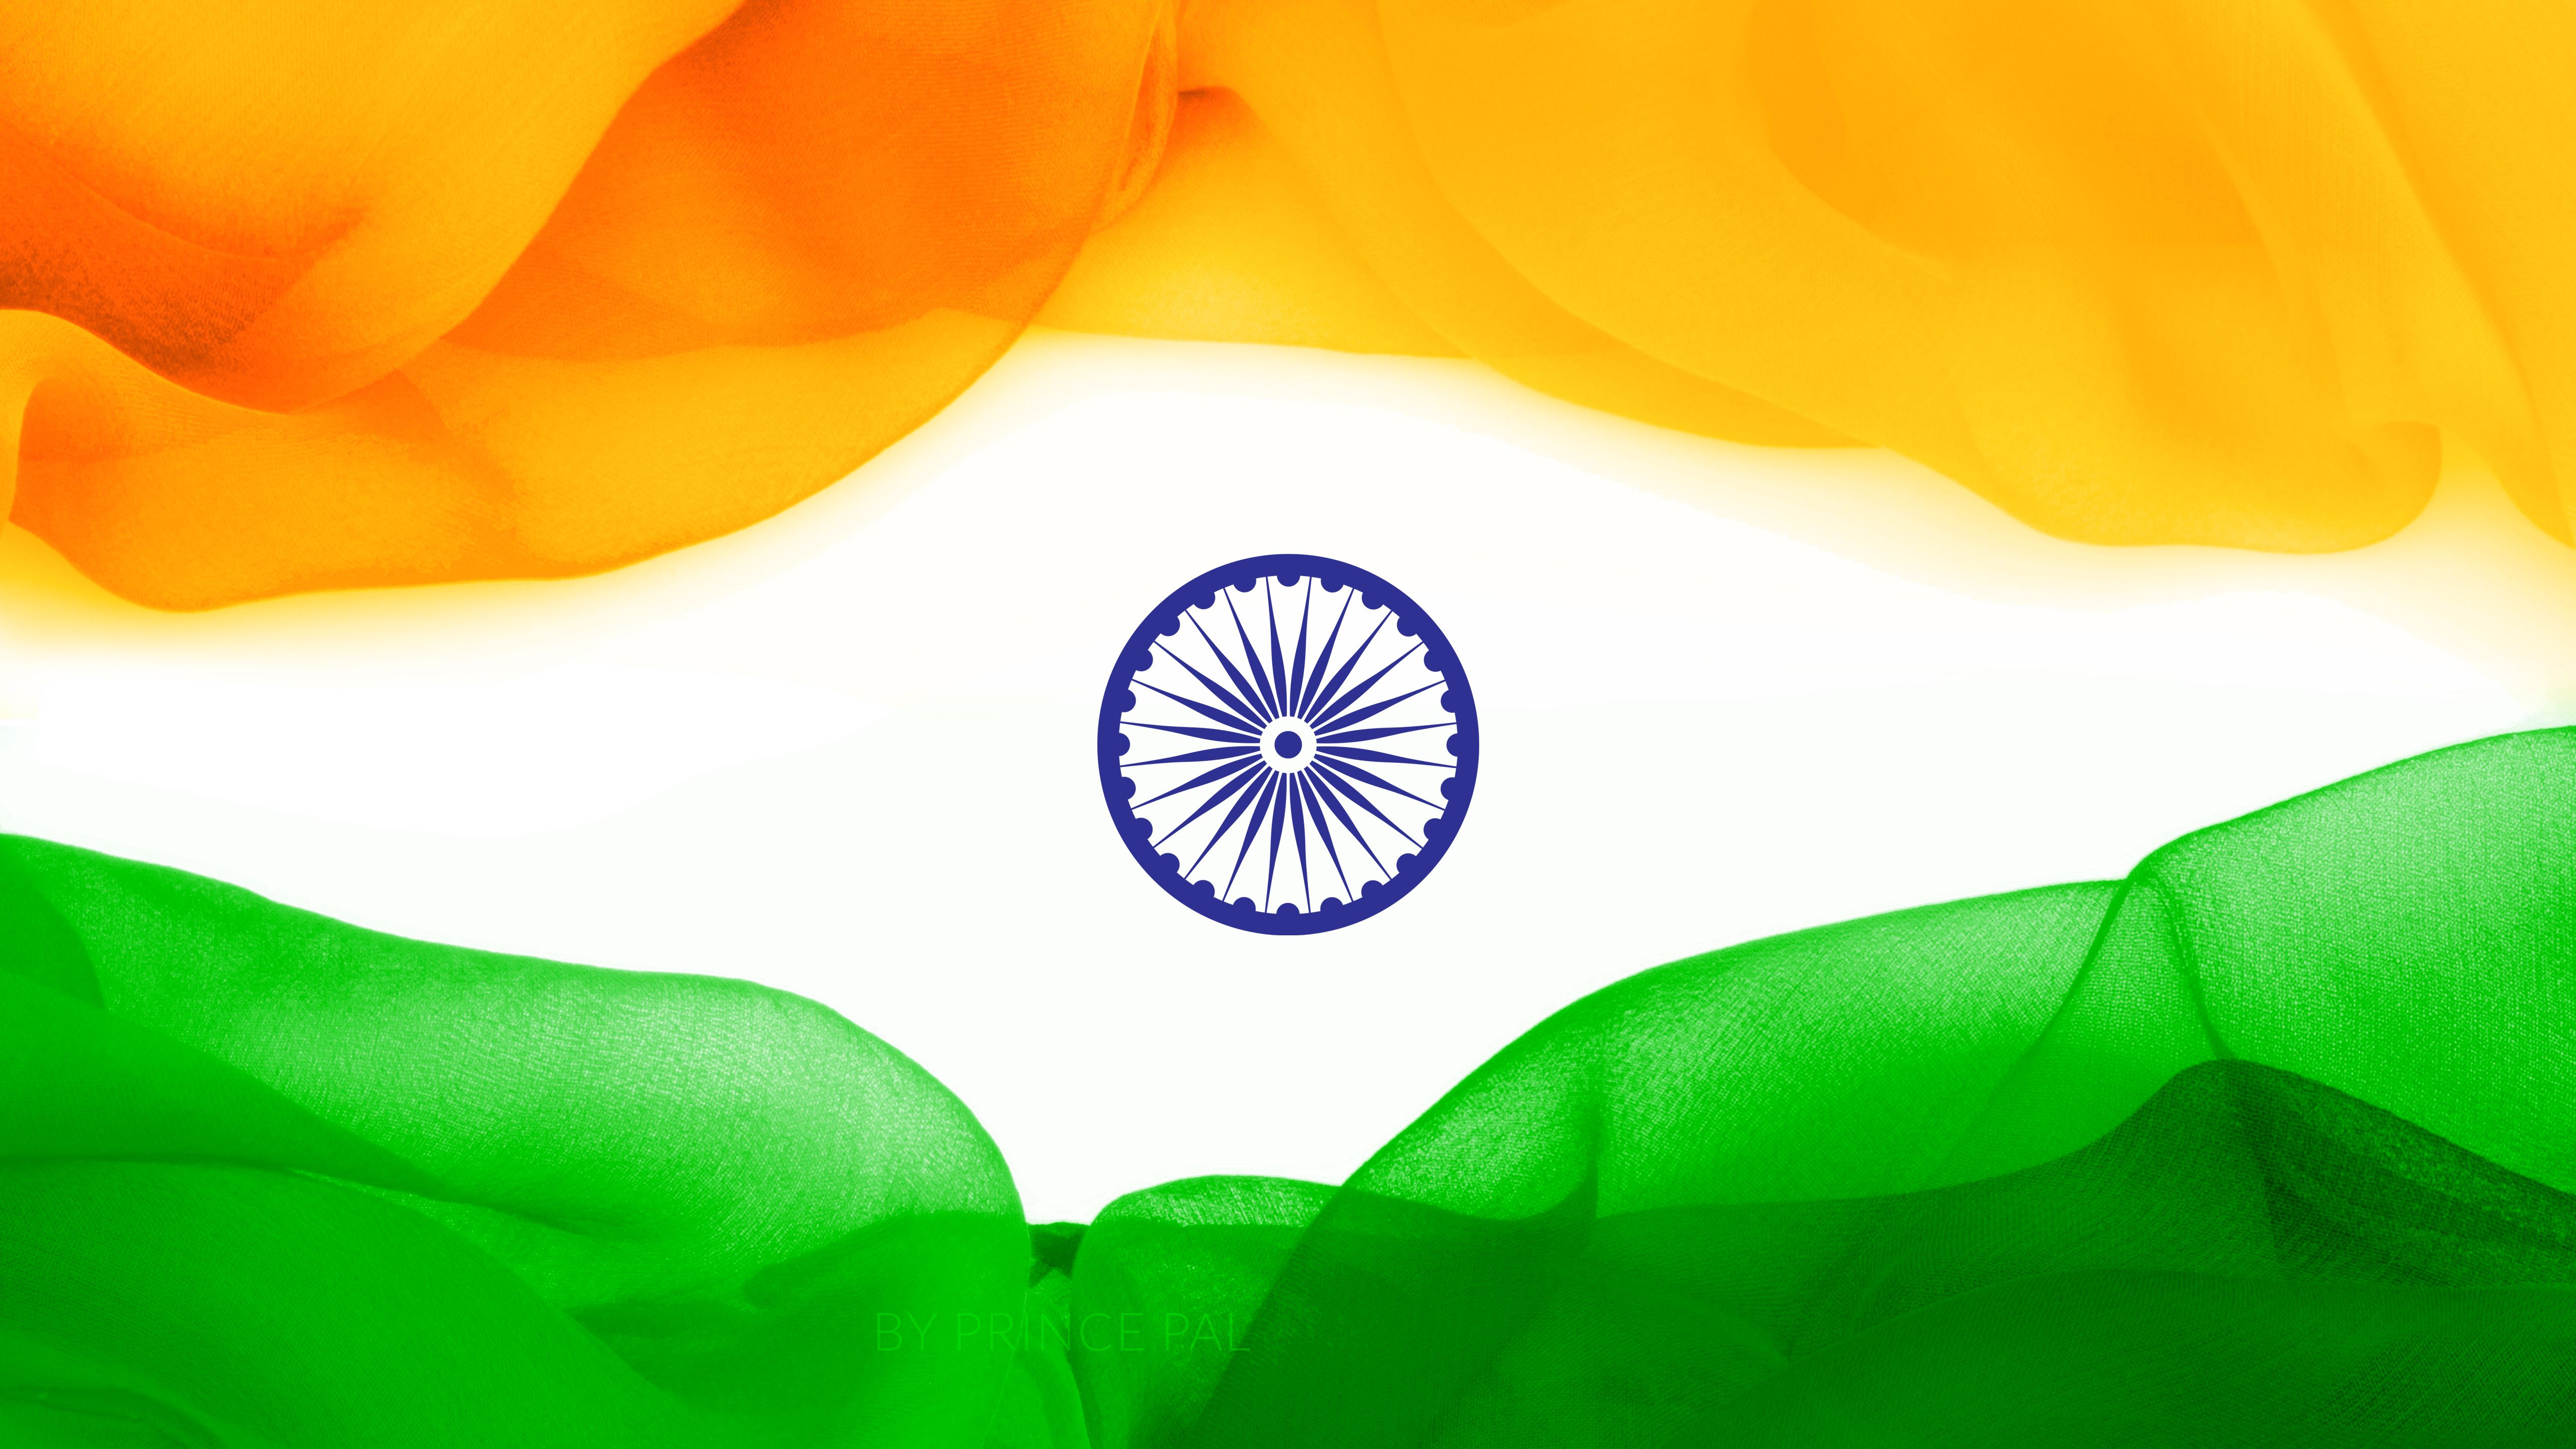 Indian National Flag HD 5K Cities Indian National Flag Hd 5k 6139 Fla. American Flag Wallpaper, National Flag, National Flag Picture